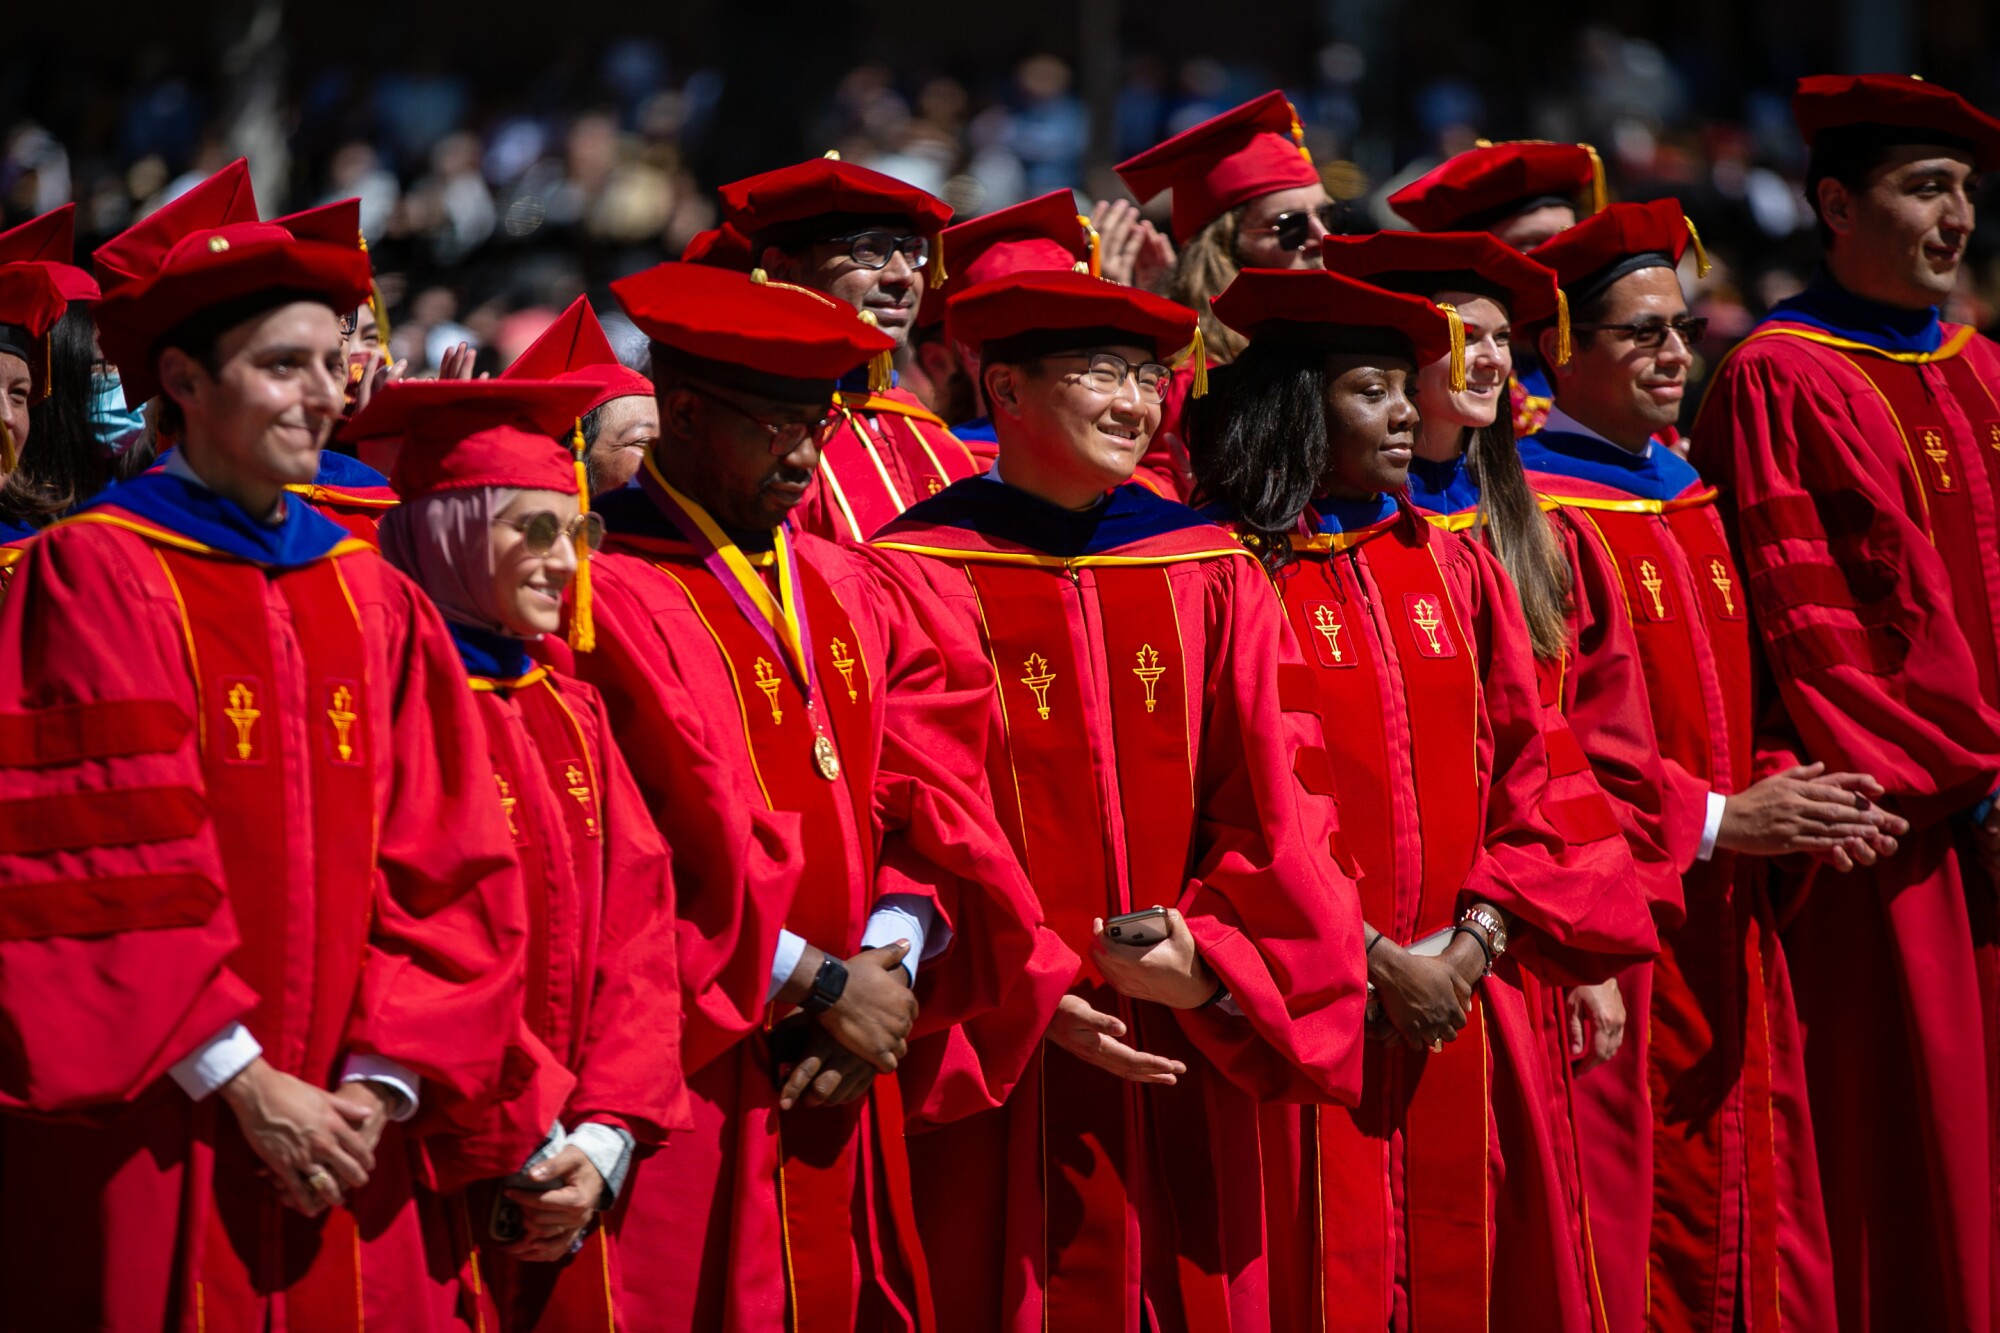 USC graduates smile in red robes.